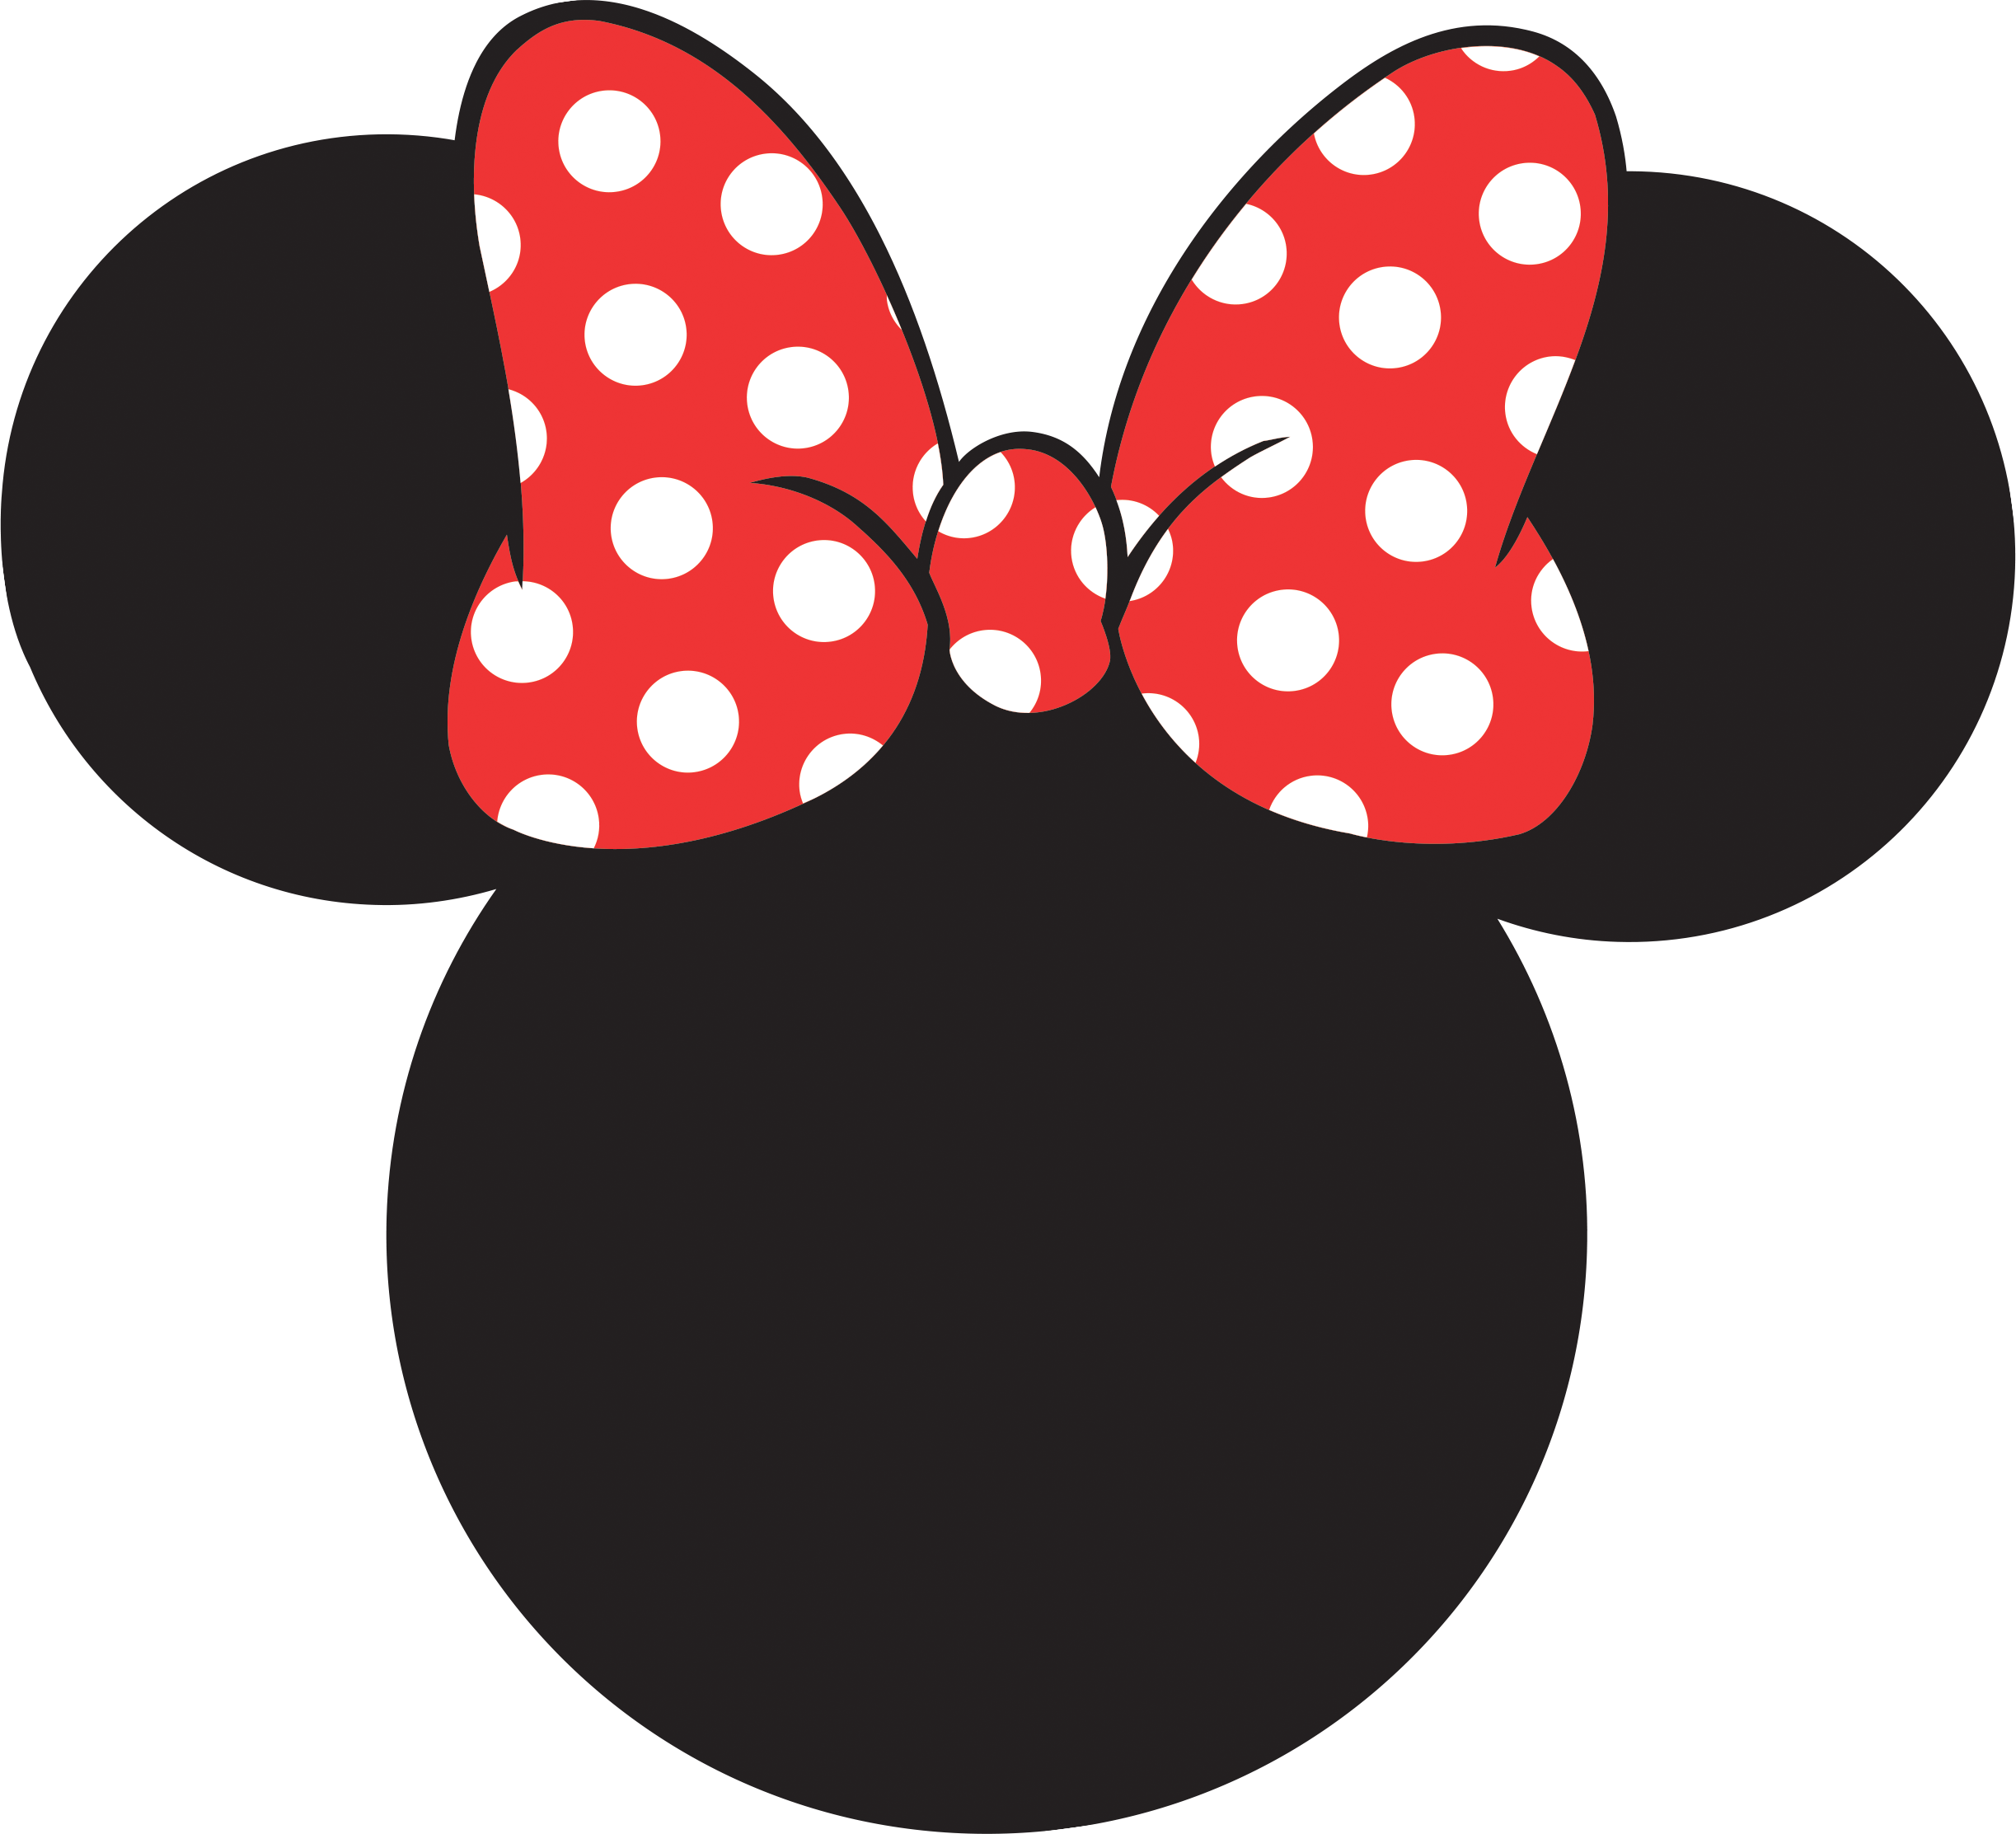 Minnie Mouse Mickey Mouse Donald Duck Clip art - minnie mouse png ...